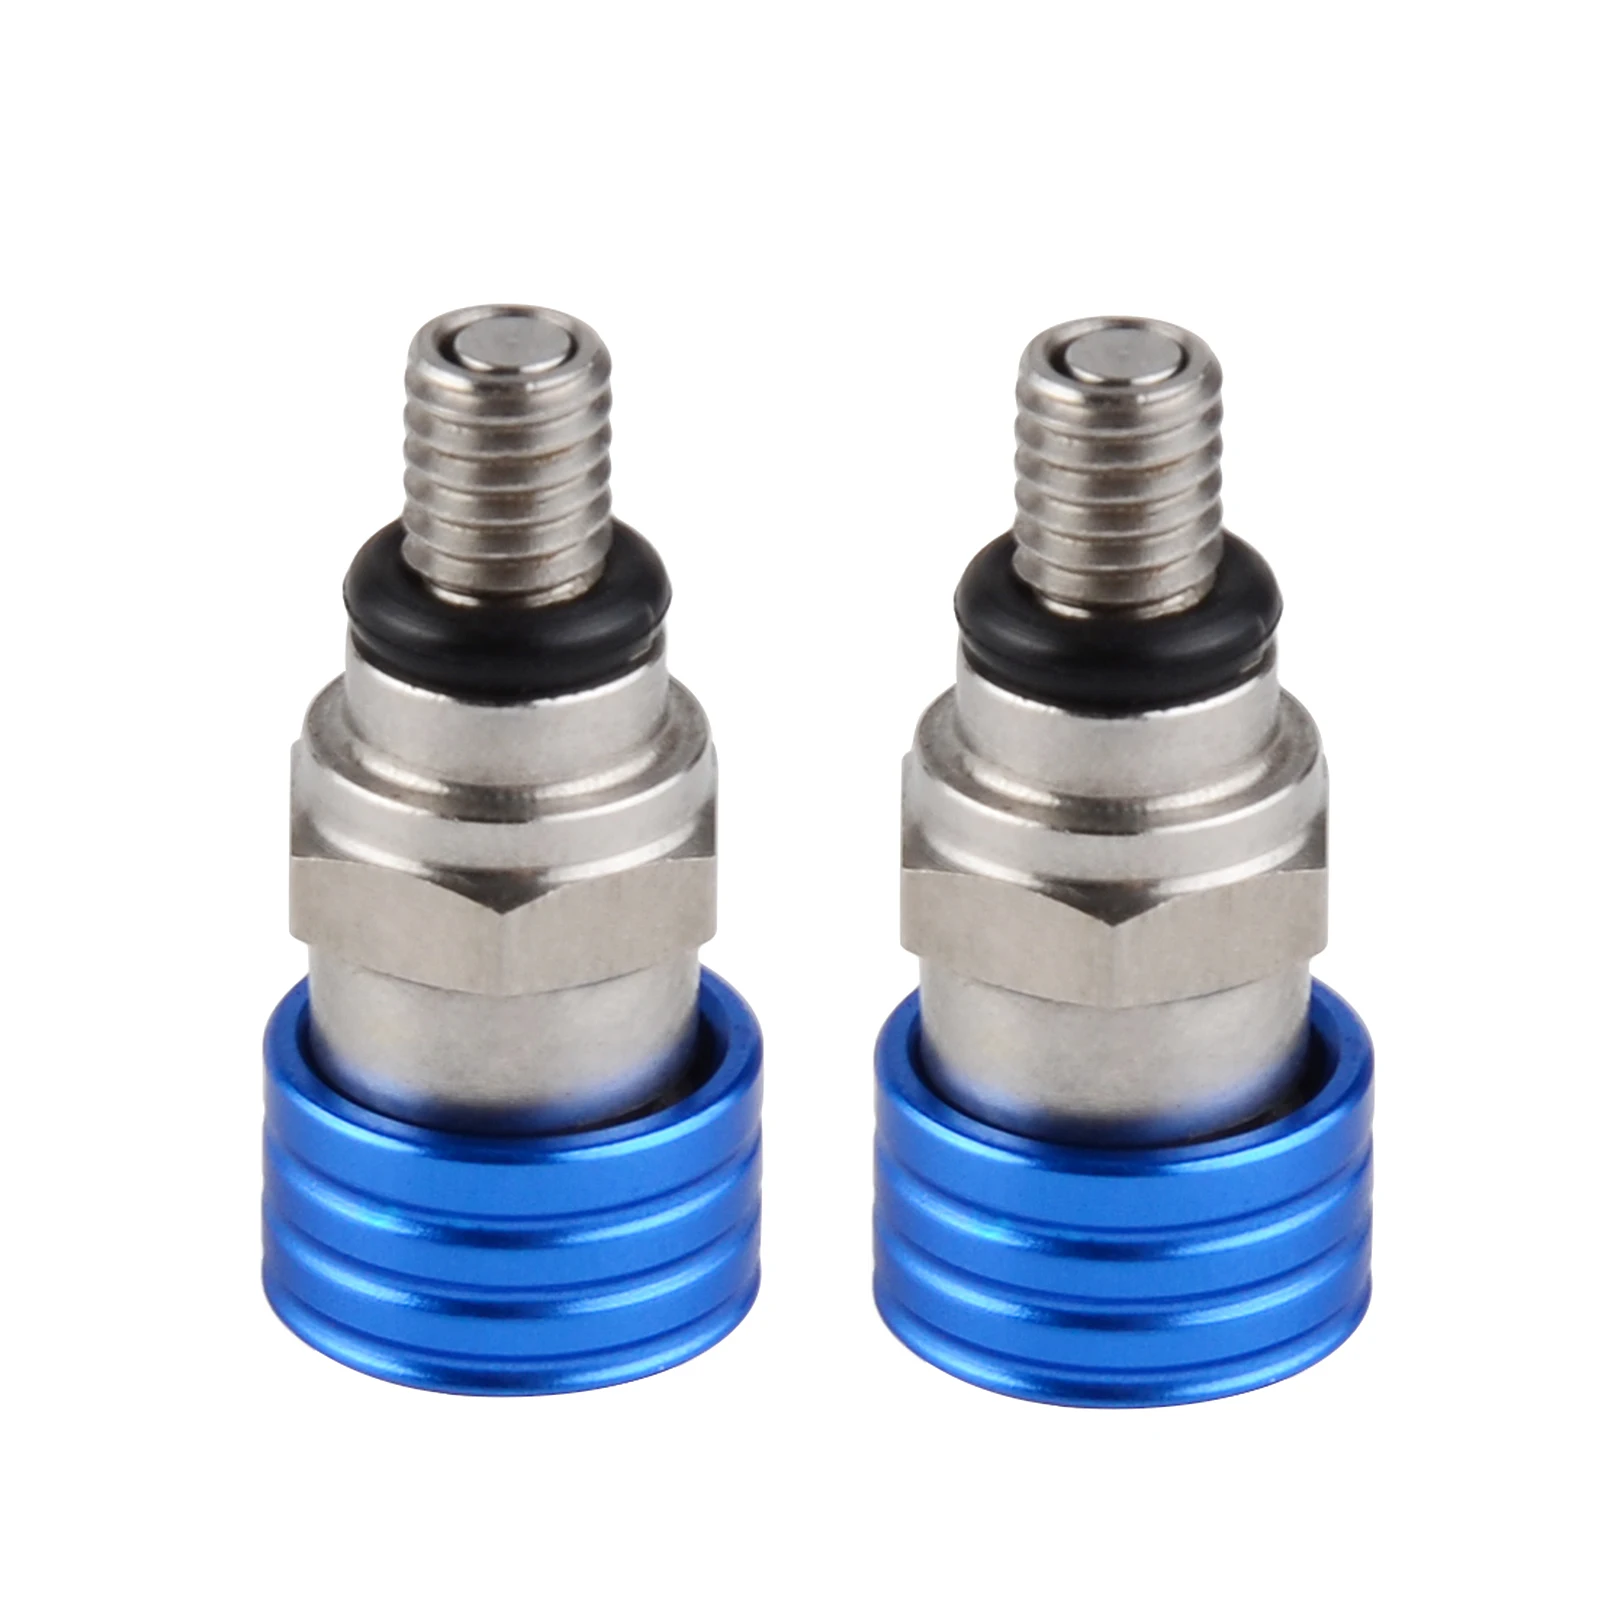 M4x0.7 Fork Air Pressure Bleeder Relief Valves Set For KTM 50 150 200 250 350 400 450 500 525 530 690 950 990 EXC SX SXF XC XCW images - 6